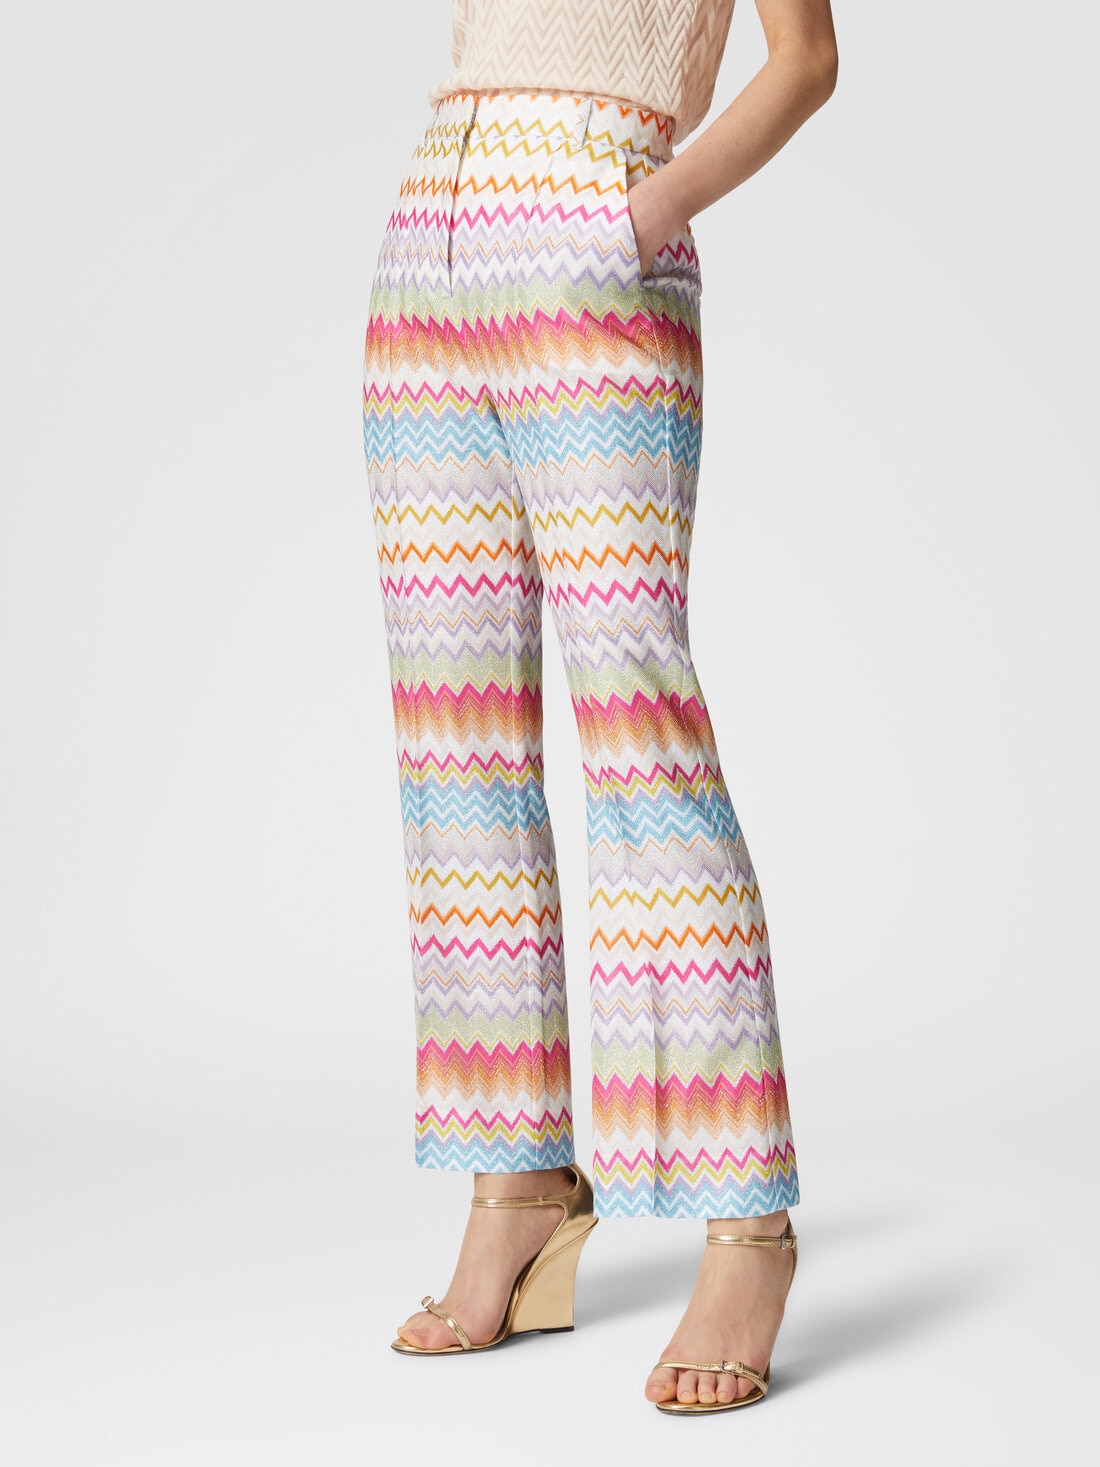 Capri trousers in chevron lamé knit with sequins, Multicoloured  - DS24SI1TBR00YBSM9CH - 3